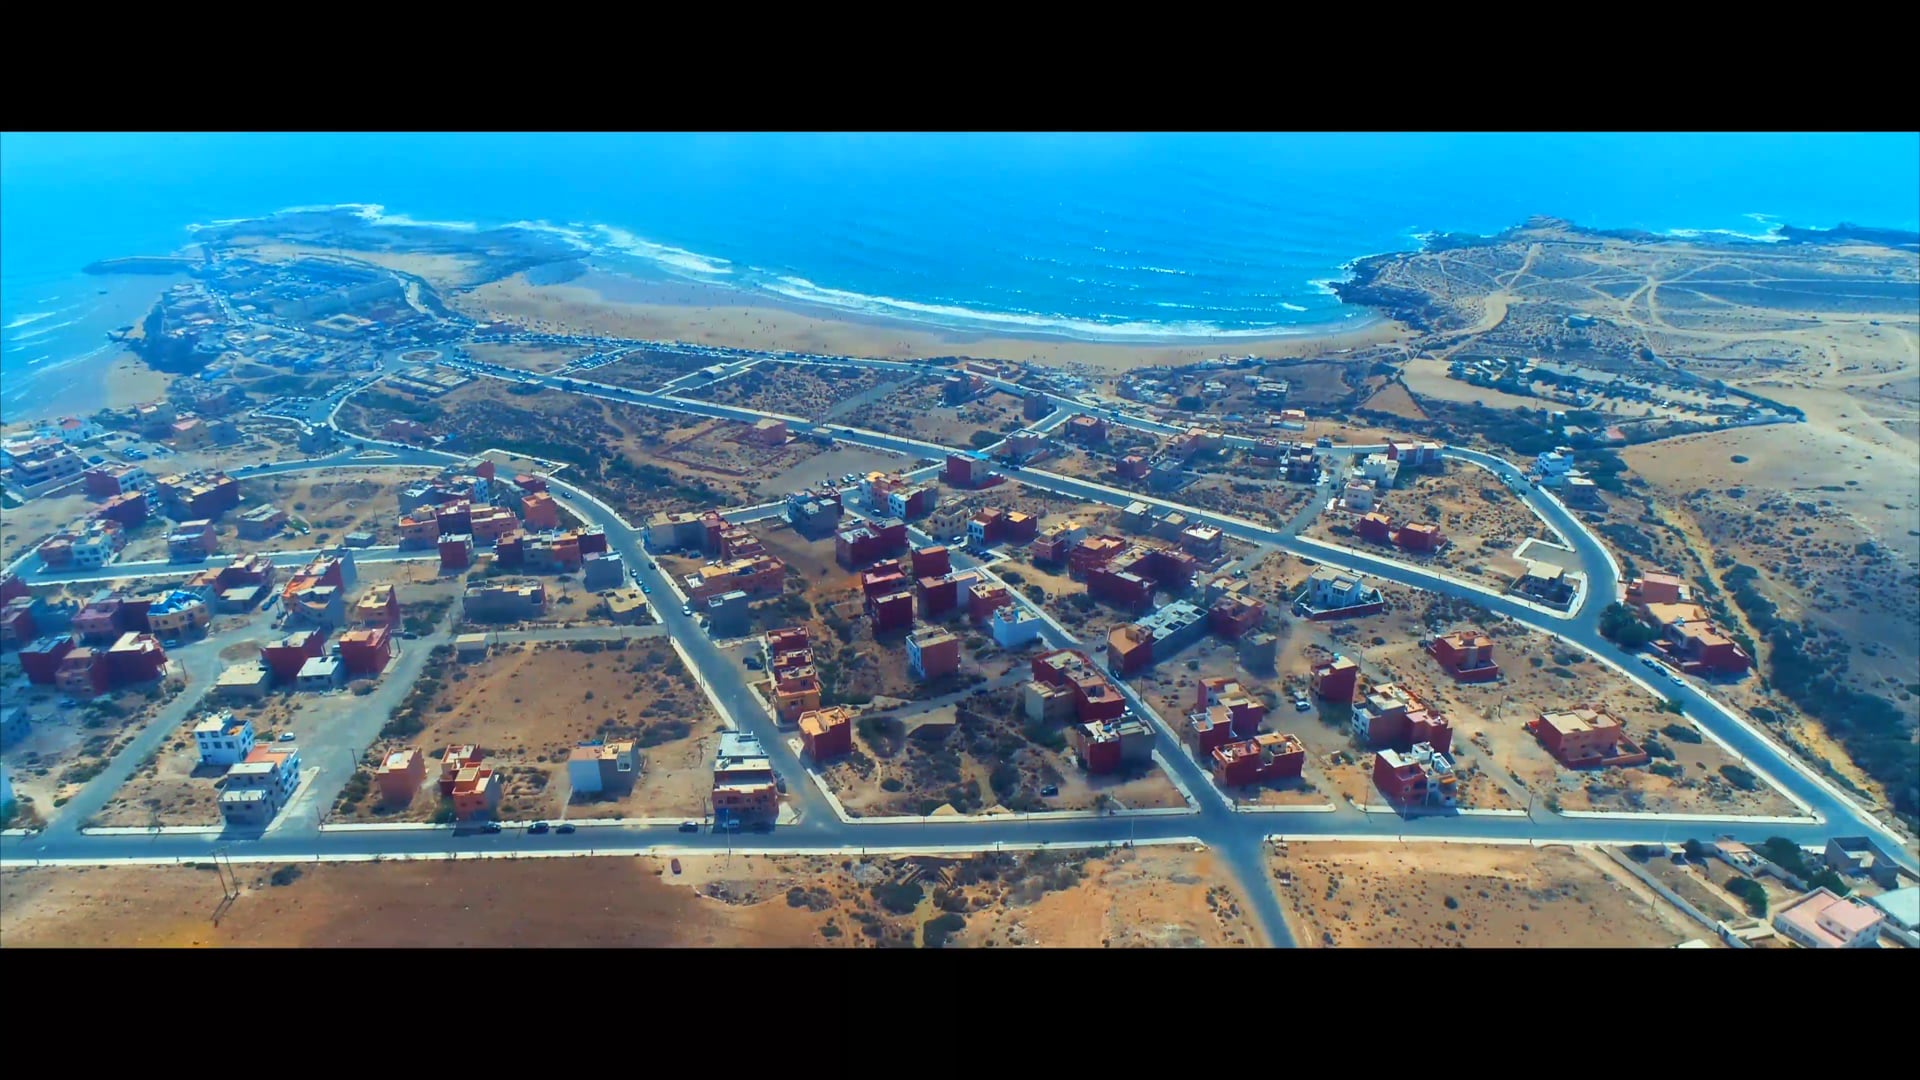 IMSOUANE - #Morocco - Aerial Shots by Drone Reveal